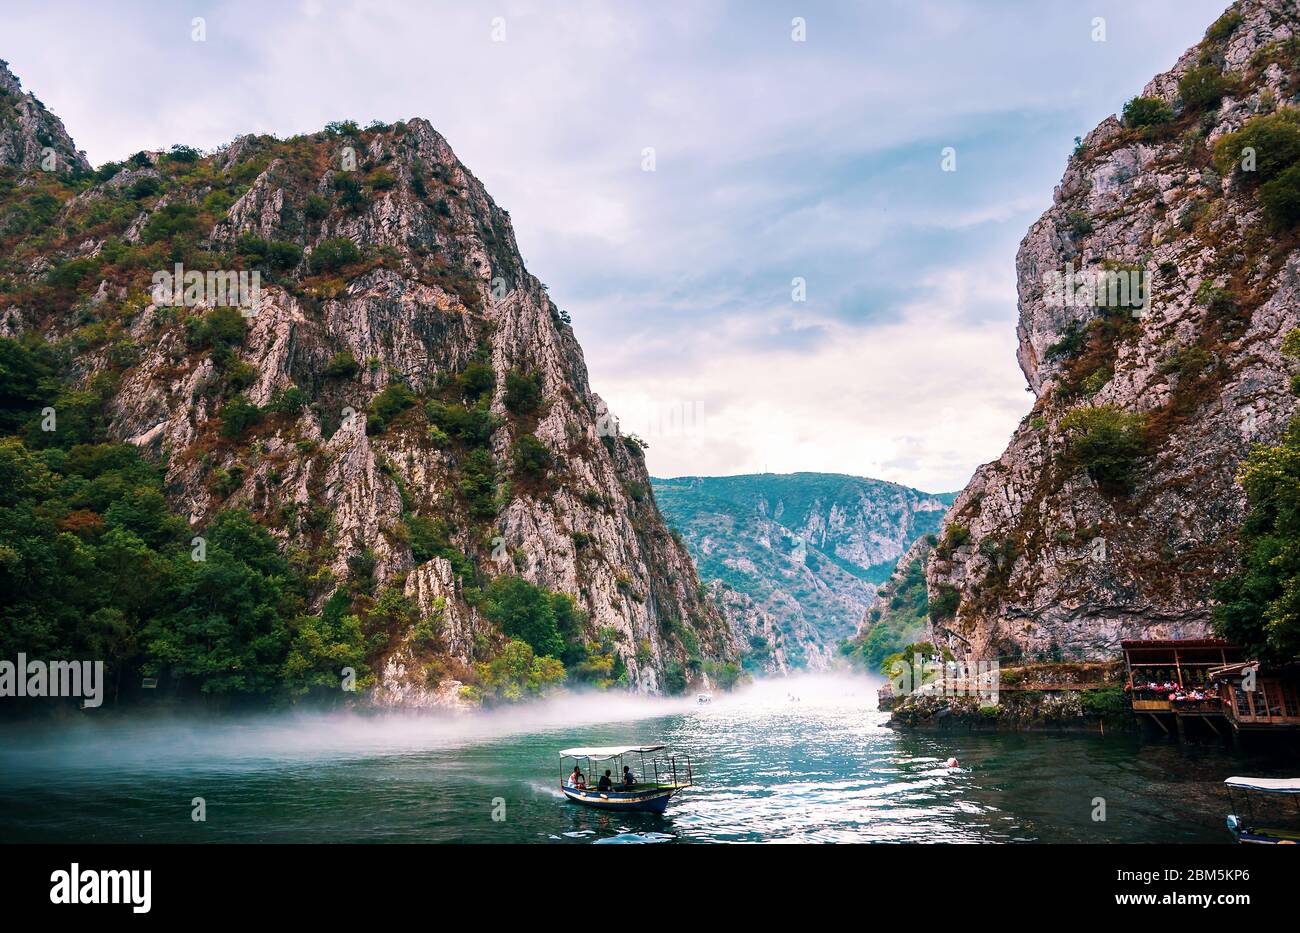 Matka, North Macedonia - August 26, 2018: Canyon Matka near Skopje, with people kayaking and magical foggy scenery with calm water Stock Photo